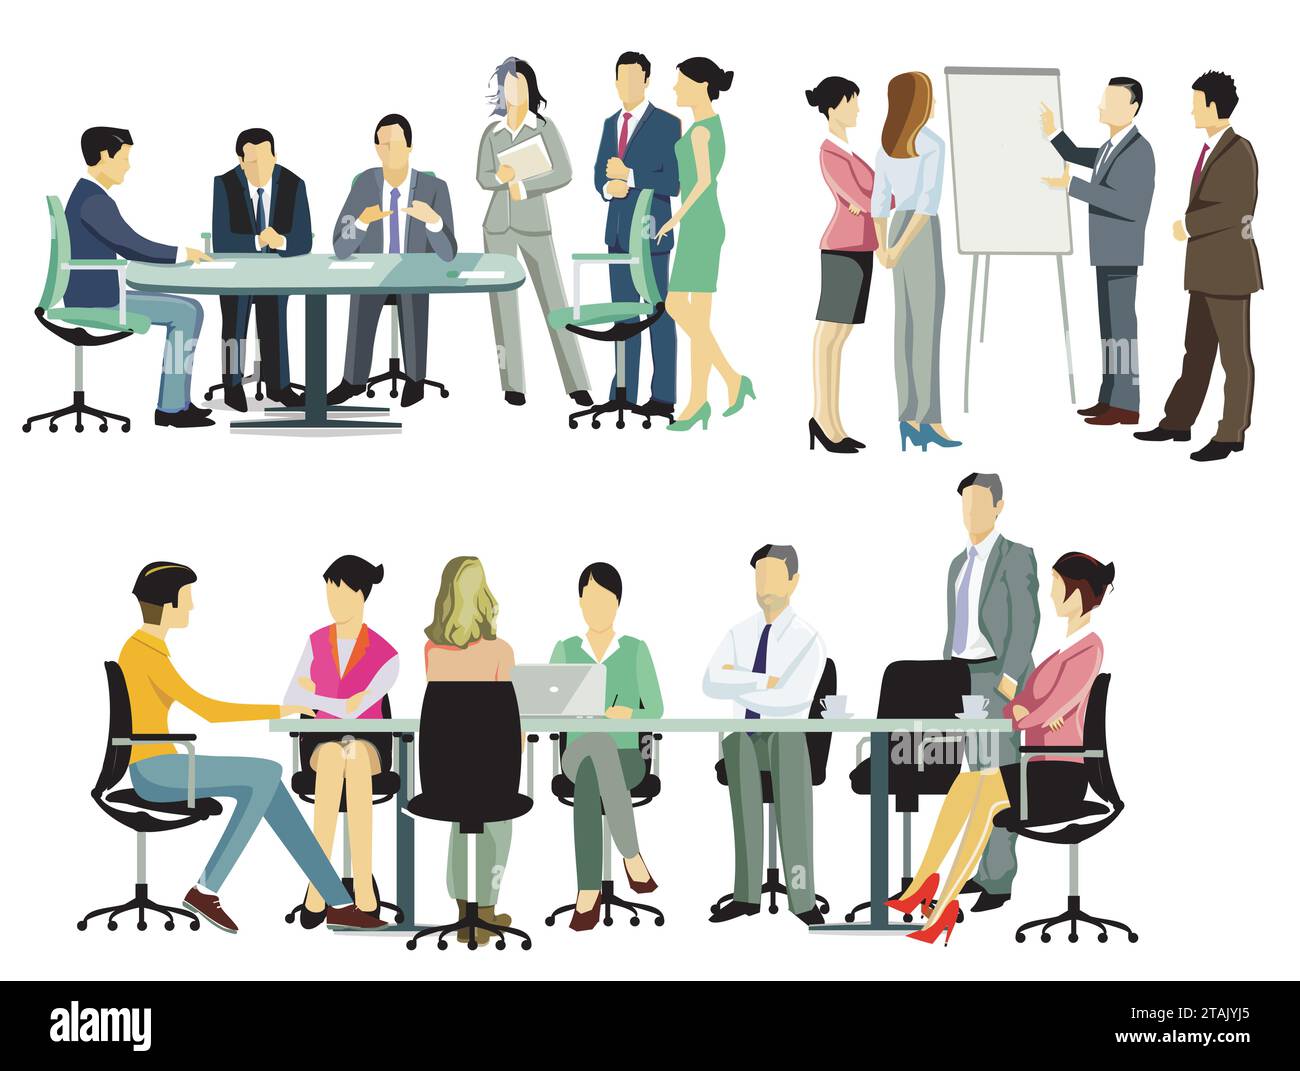 Business meeting, course and training illustration Stock Vector